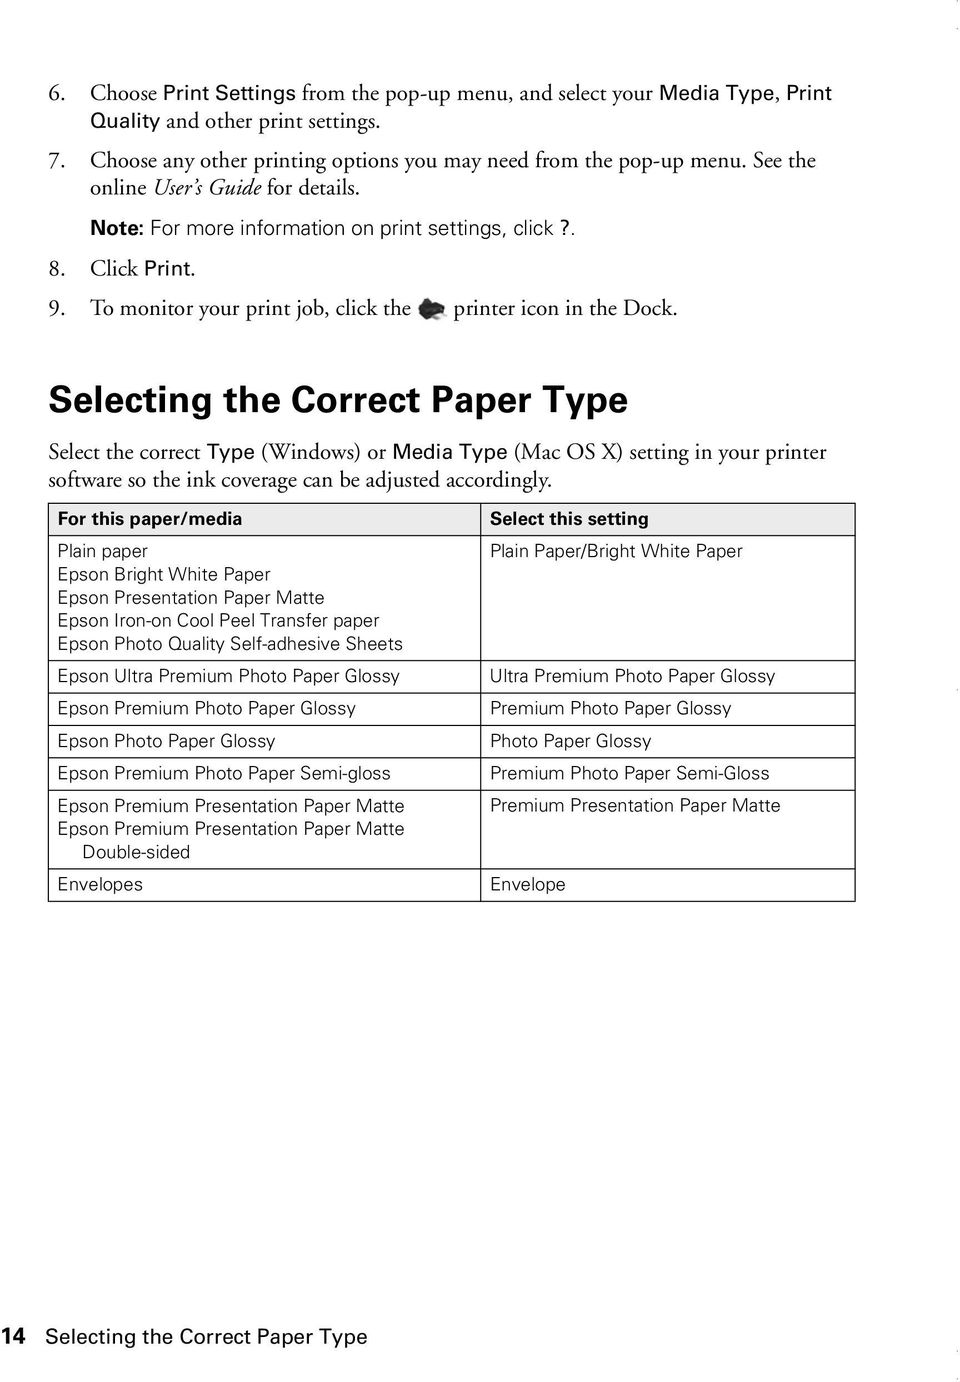 Selecting the Correct Paper Type Select the correct Type (Windows) or Media Type (Mac OS X) setting in your printer software so the ink coverage can be adjusted accordingly.